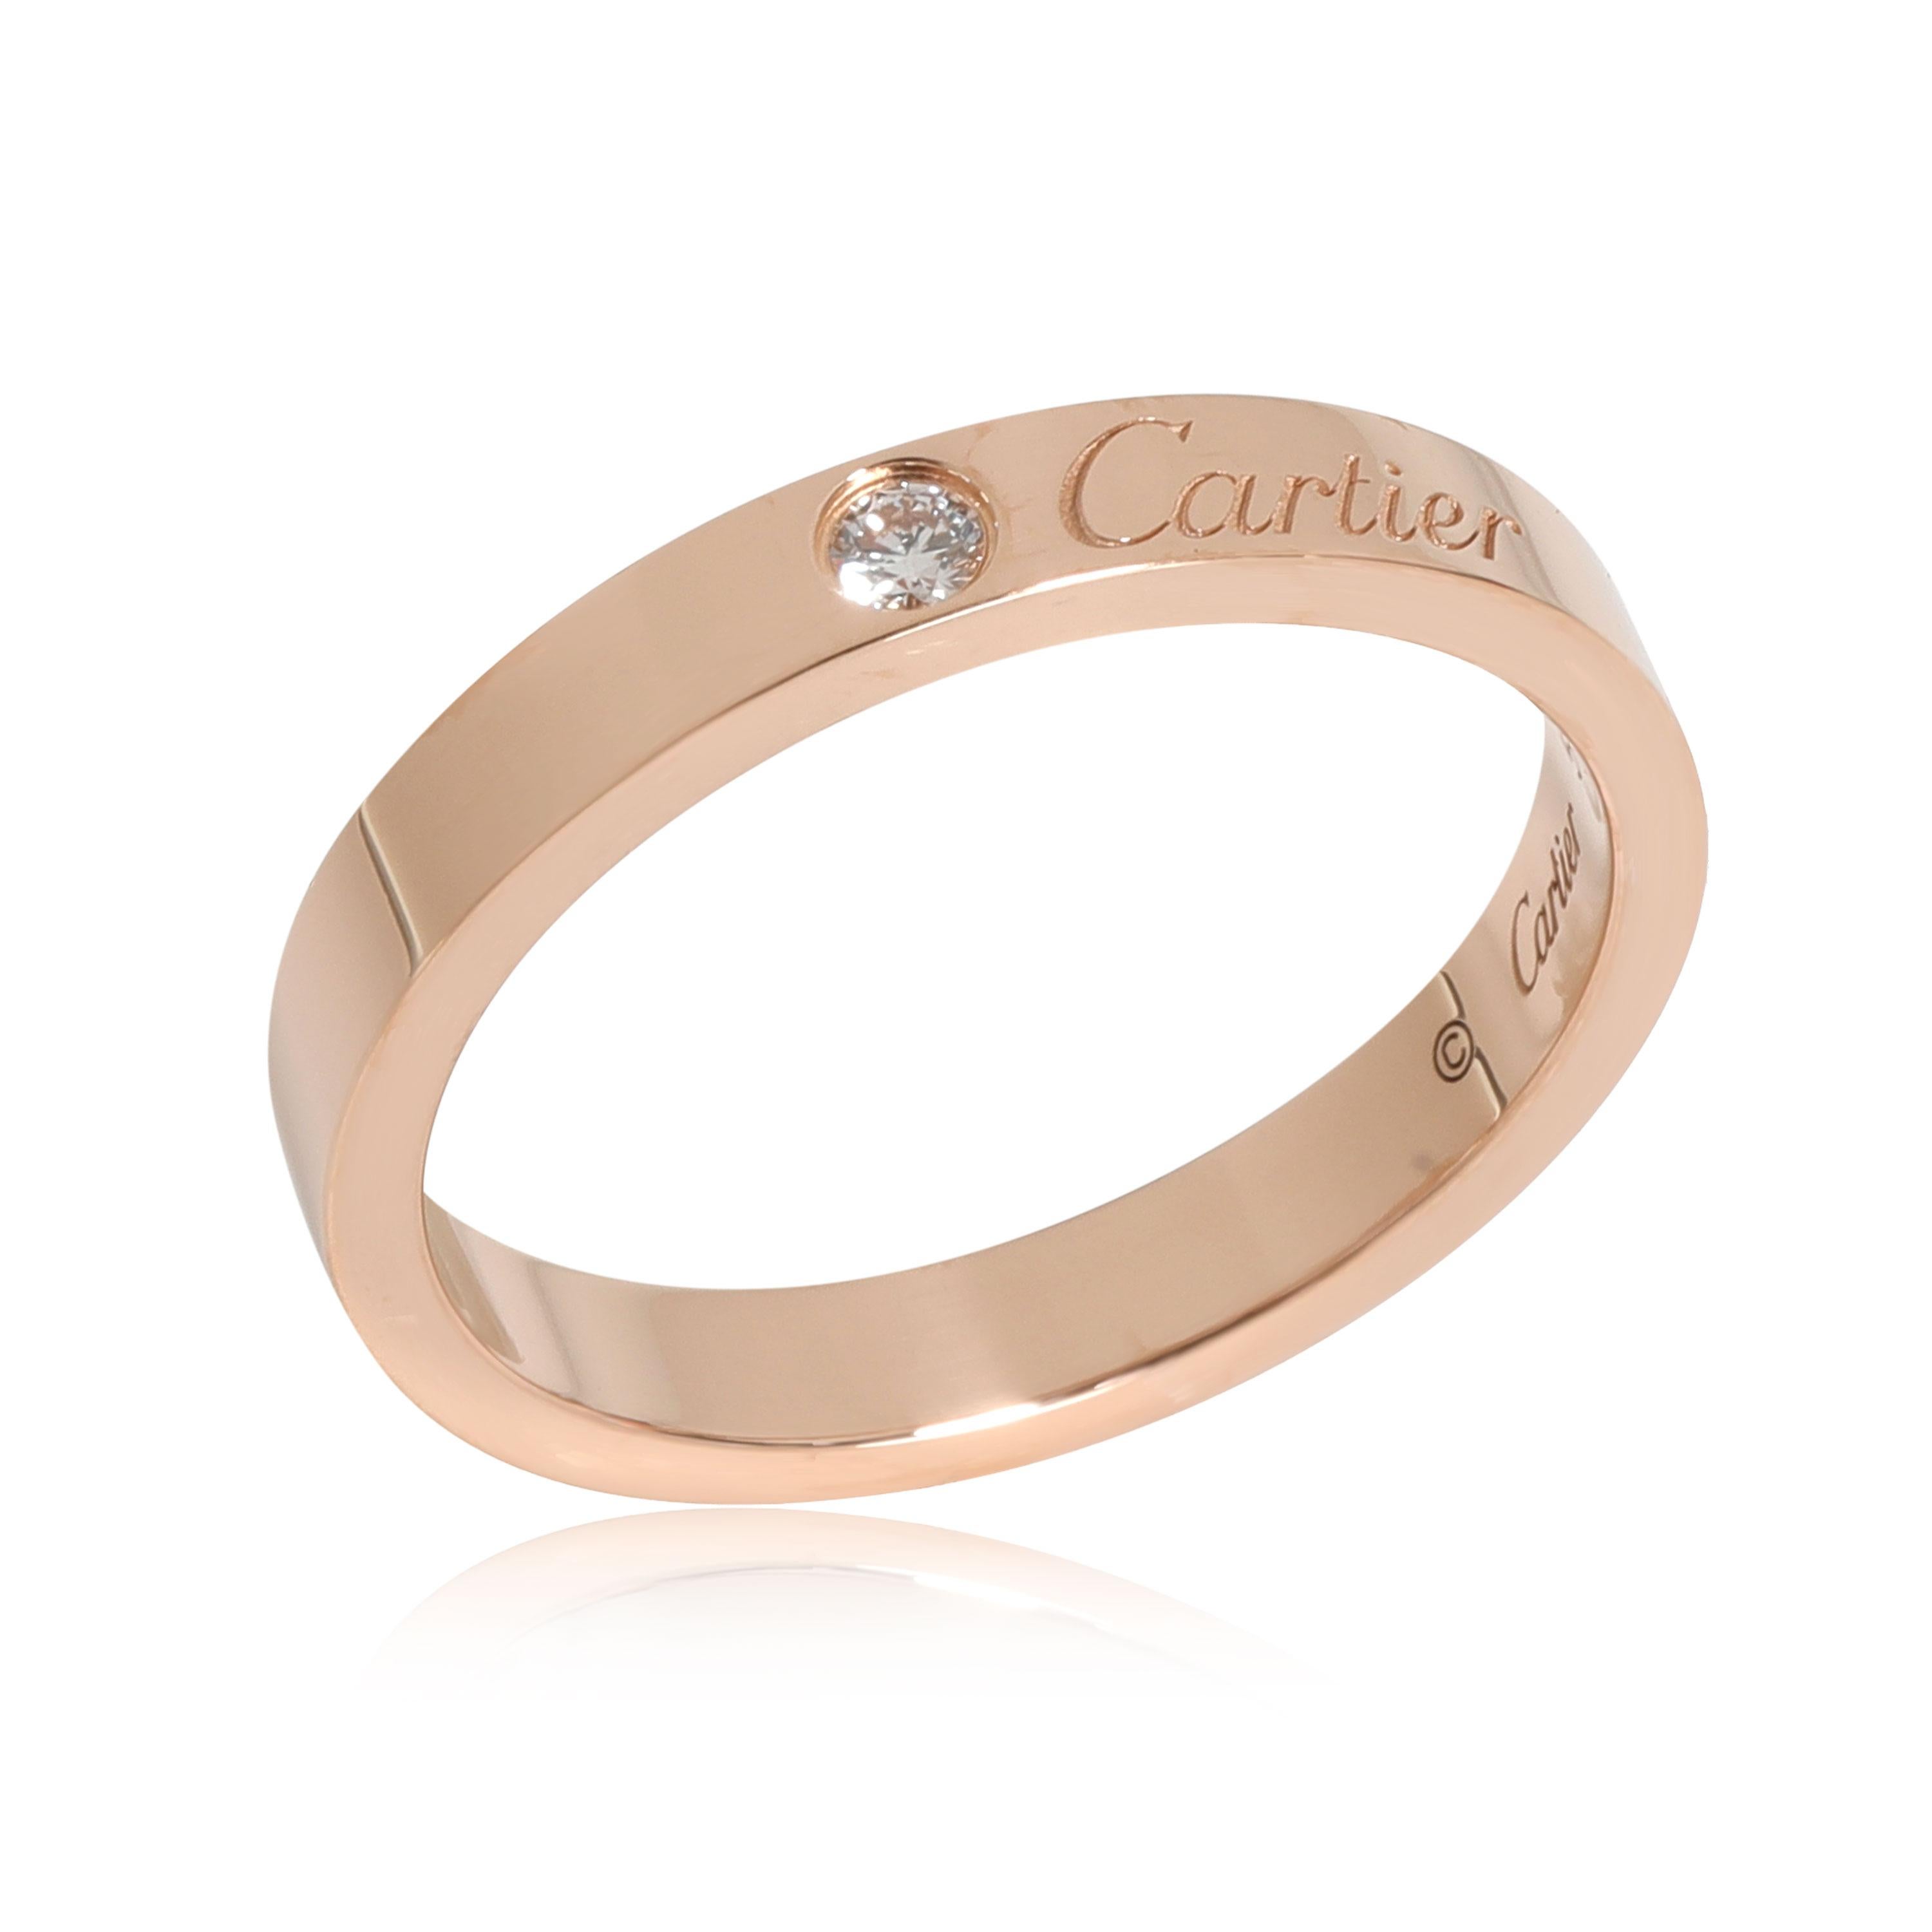 Cartier C De Cartier Diamond Wedding Band in 18k Rose Gold 0.03 CTW In Excellent Condition In New York, NY